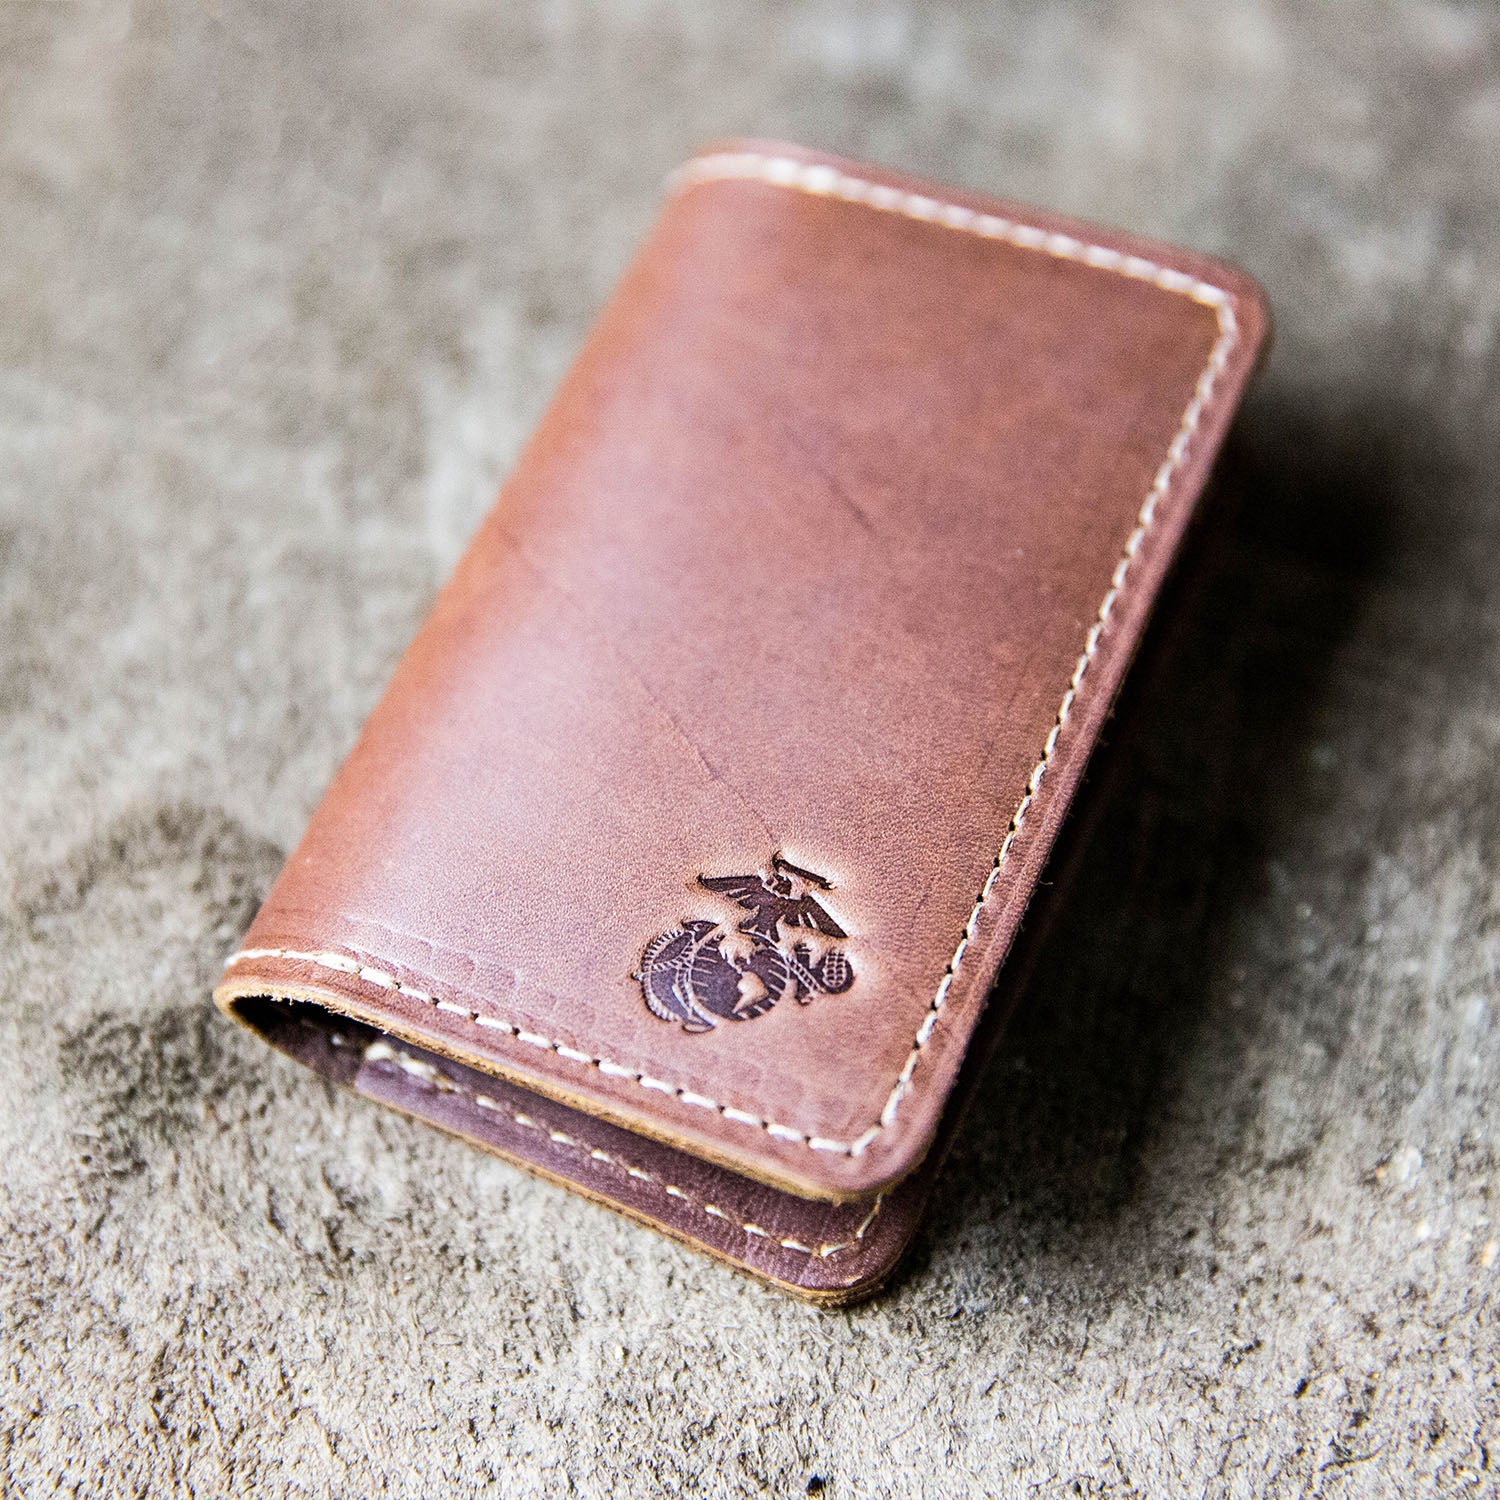 Fine leather bifold wallet and business card holder with Marine Corps logo